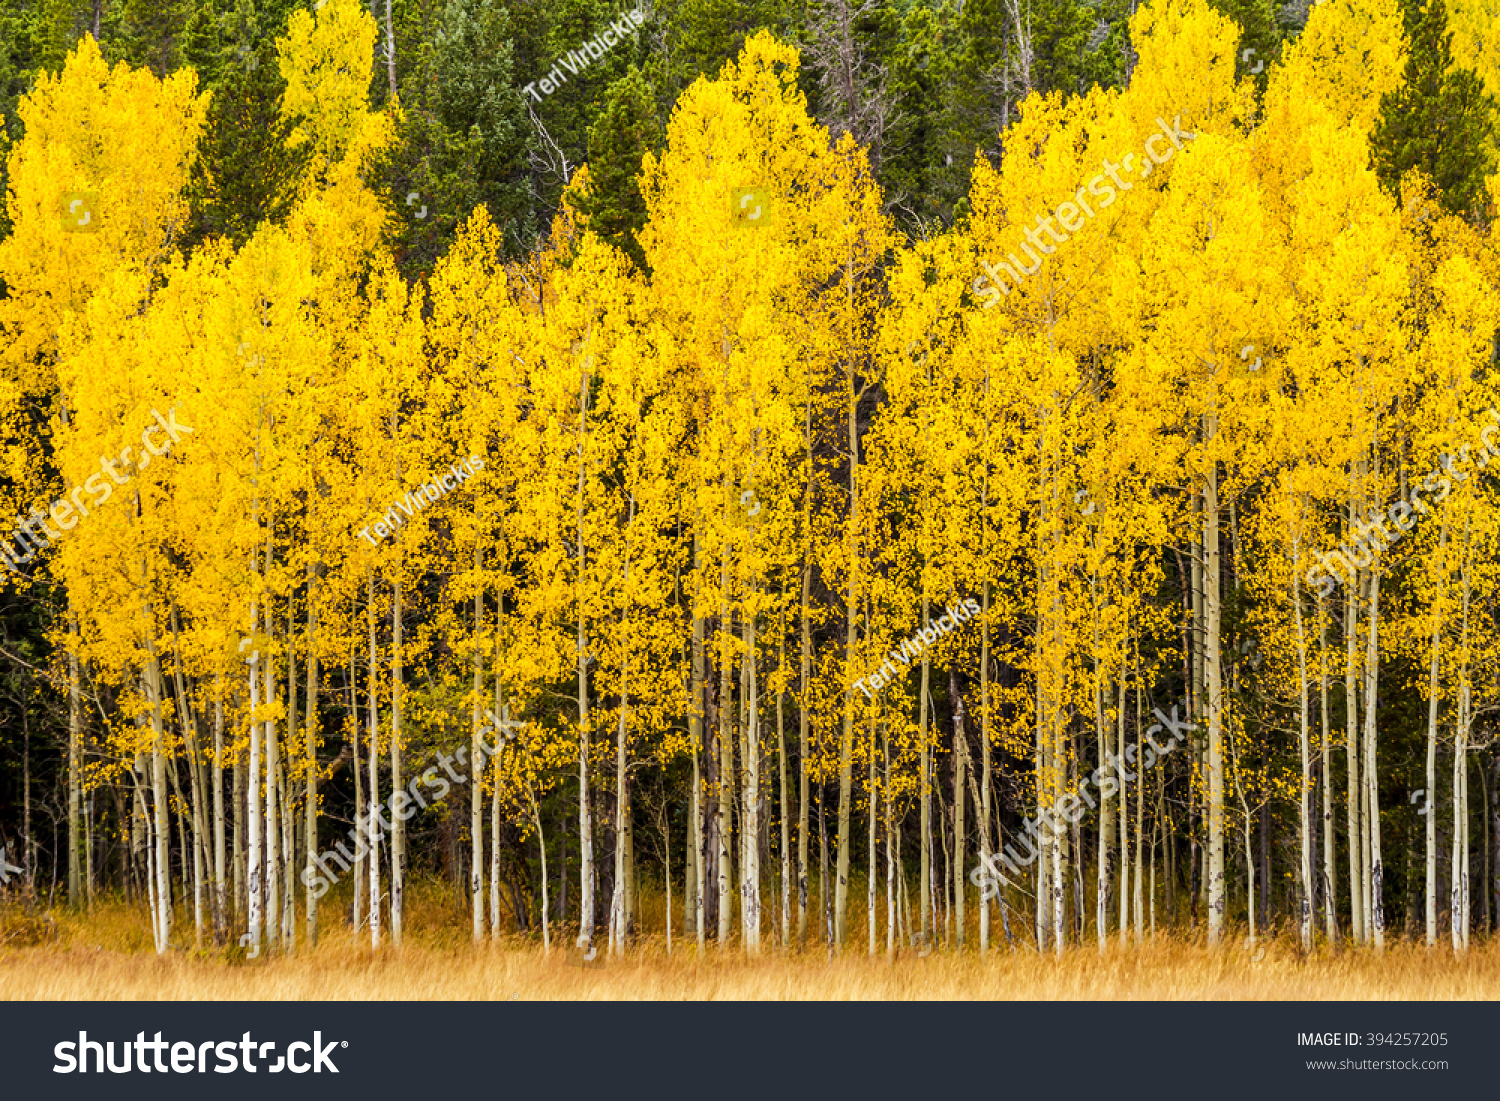 Stand of changing yellow Aspen tree in front of dark green pine trees in mountains of Colorado on fall afternoon #394257205